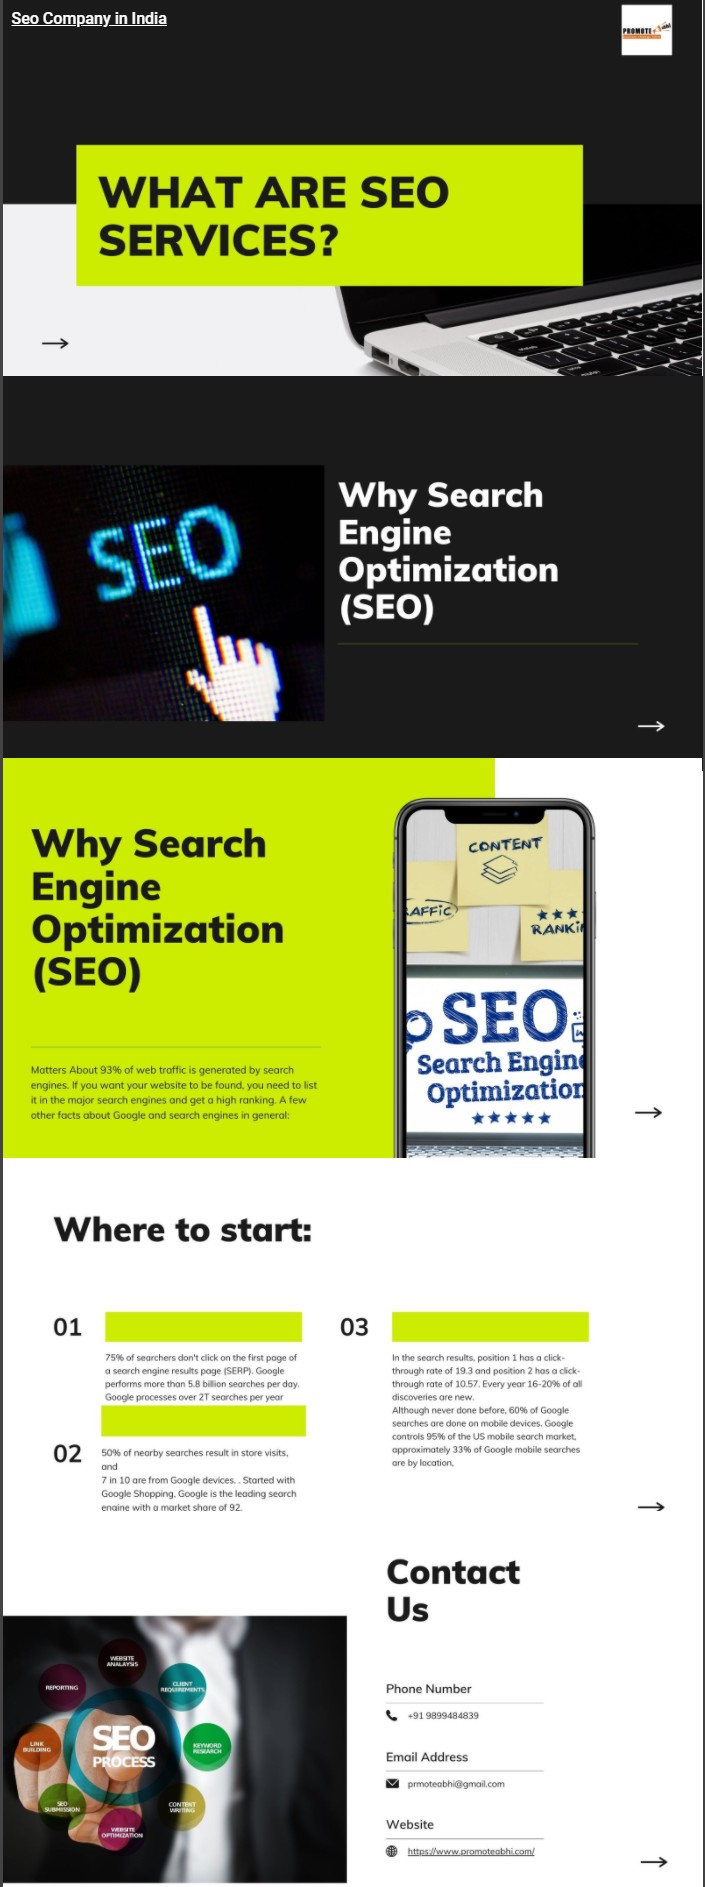 What are SEO Services ?